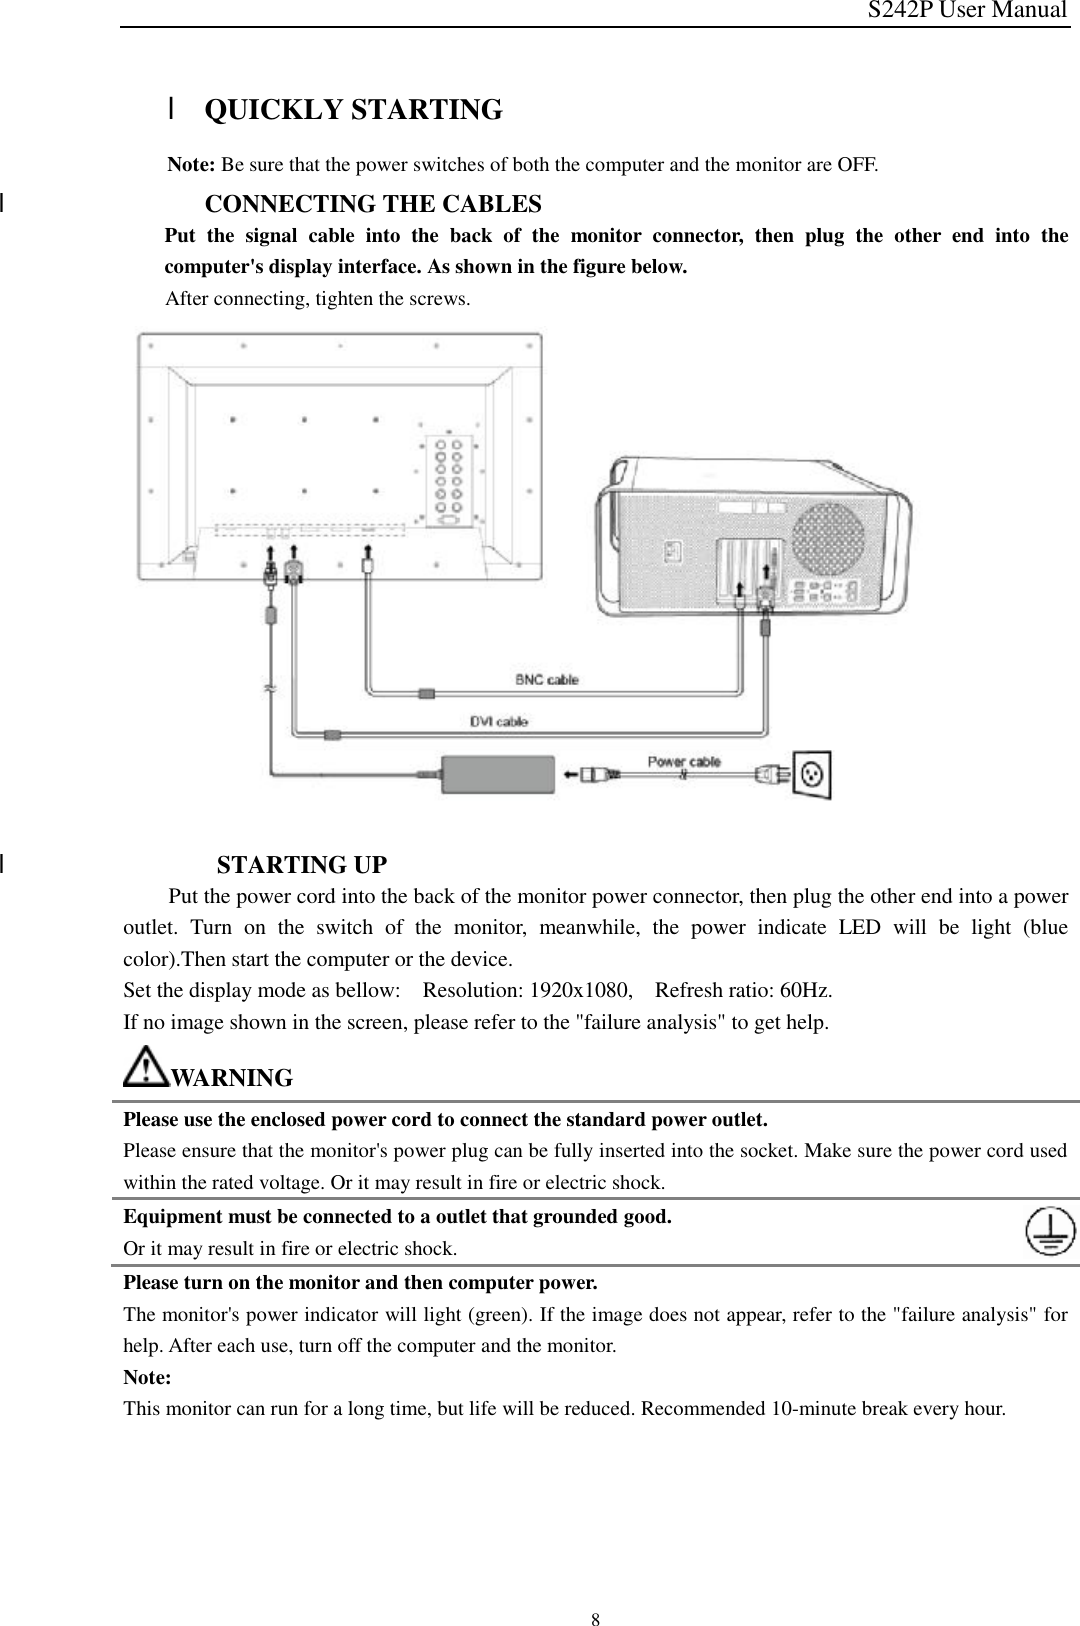 S242P User Manual 8  l QUICKLY STARTING     Note: Be sure that the power switches of both the computer and the monitor are OFF.  l CONNECTING THE CABLES Put the signal cable into the back of the monitor connector, then plug the other end into the computer&apos;s display interface. As shown in the figure below. After connecting, tighten the screws.                  l  STARTING UP     Put the power cord into the back of the monitor power connector, then plug the other end into a power outlet. Turn on the switch of the monitor, meanwhile, the power indicate LED will be light (blue color).Then start the computer or the device. Set the display mode as bellow:  Resolution: 1920x1080,  Refresh ratio: 60Hz. If no image shown in the screen, please refer to the &quot;failure analysis&quot; to get help. WARNING Please use the enclosed power cord to connect the standard power outlet. Please ensure that the monitor&apos;s power plug can be fully inserted into the socket. Make sure the power cord used within the rated voltage. Or it may result in fire or electric shock. Equipment must be connected to a outlet that grounded good. Or it may result in fire or electric shock. Please turn on the monitor and then computer power. The monitor&apos;s power indicator will light (green). If the image does not appear, refer to the &quot;failure analysis&quot; for help. After each use, turn off the computer and the monitor. Note: This monitor can run for a long time, but life will be reduced. Recommended 10-minute break every hour.    